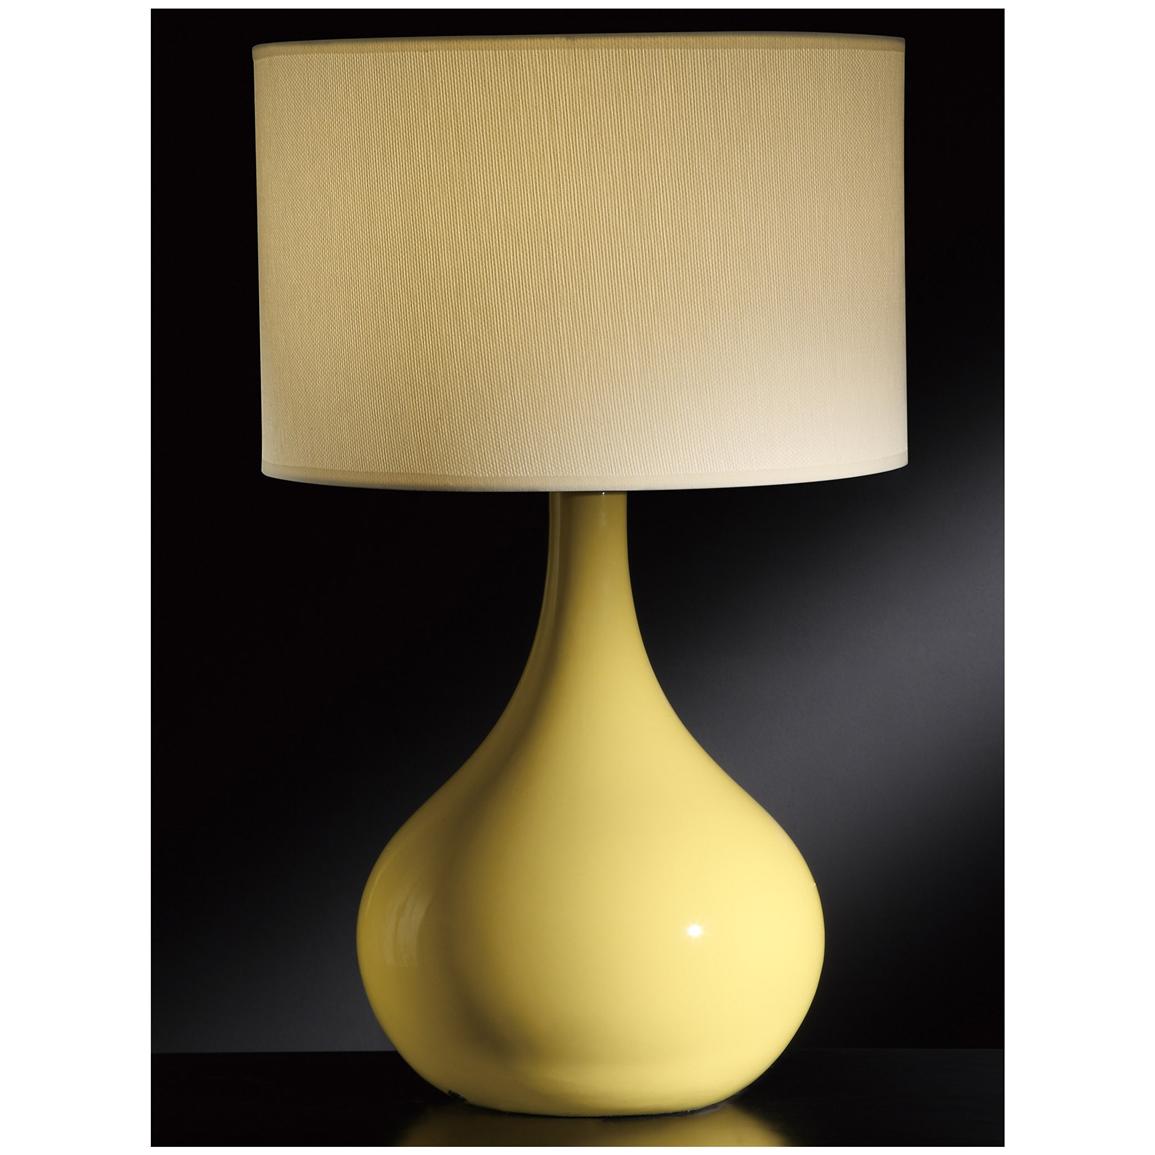 Crestview® Cabot Yellow Table Lamp - 233461, Lighting at Sportsman's Guide